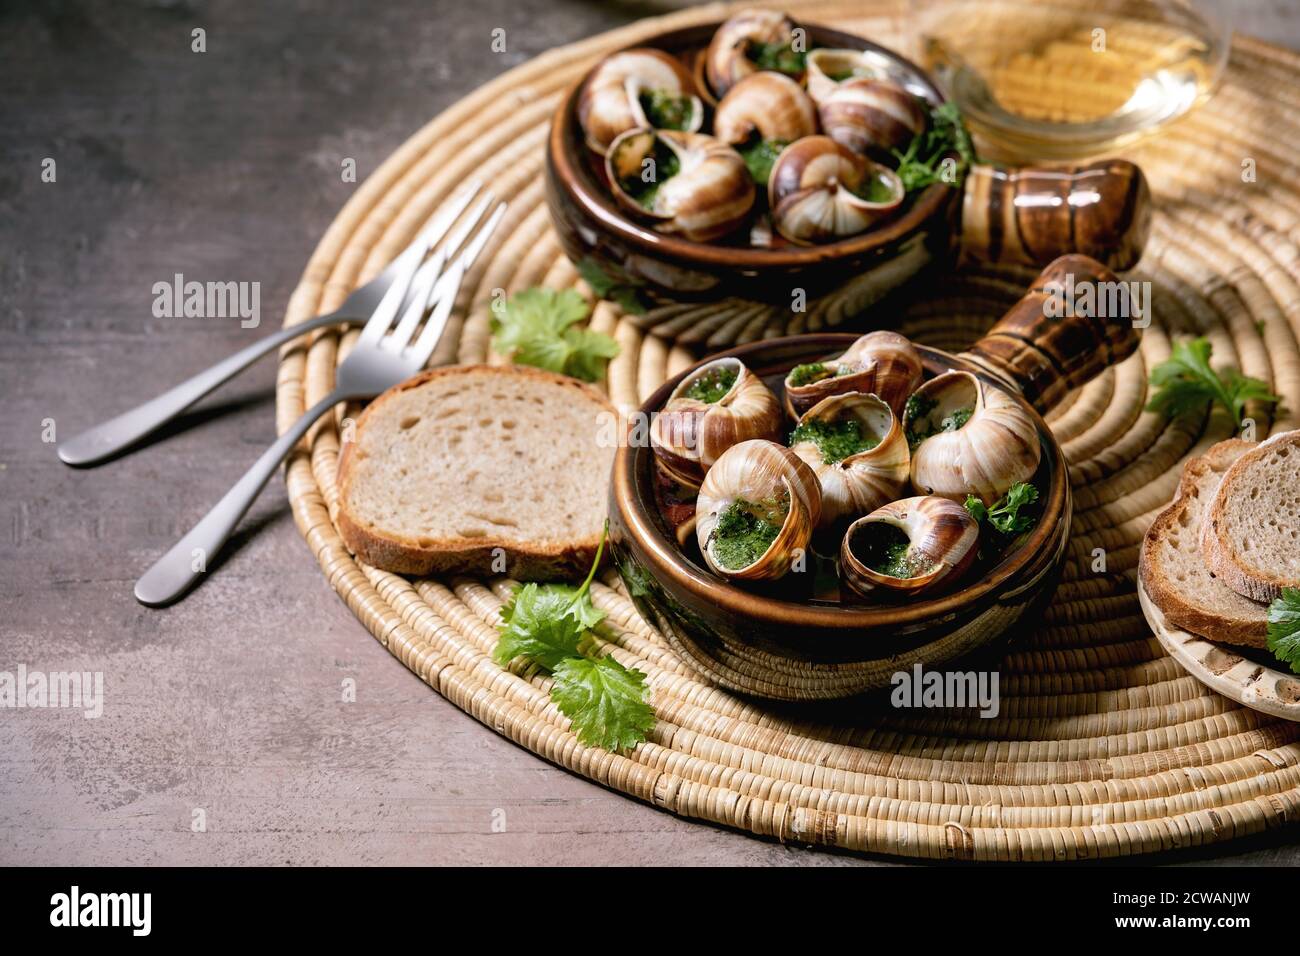 Escargots De Bourgogne Snails With Herbs Butter Gourmet Dish In Two Traditional Ceramic Pans With Coriander Bread And Glass Of White Wine On Stra Stock Photo Alamy